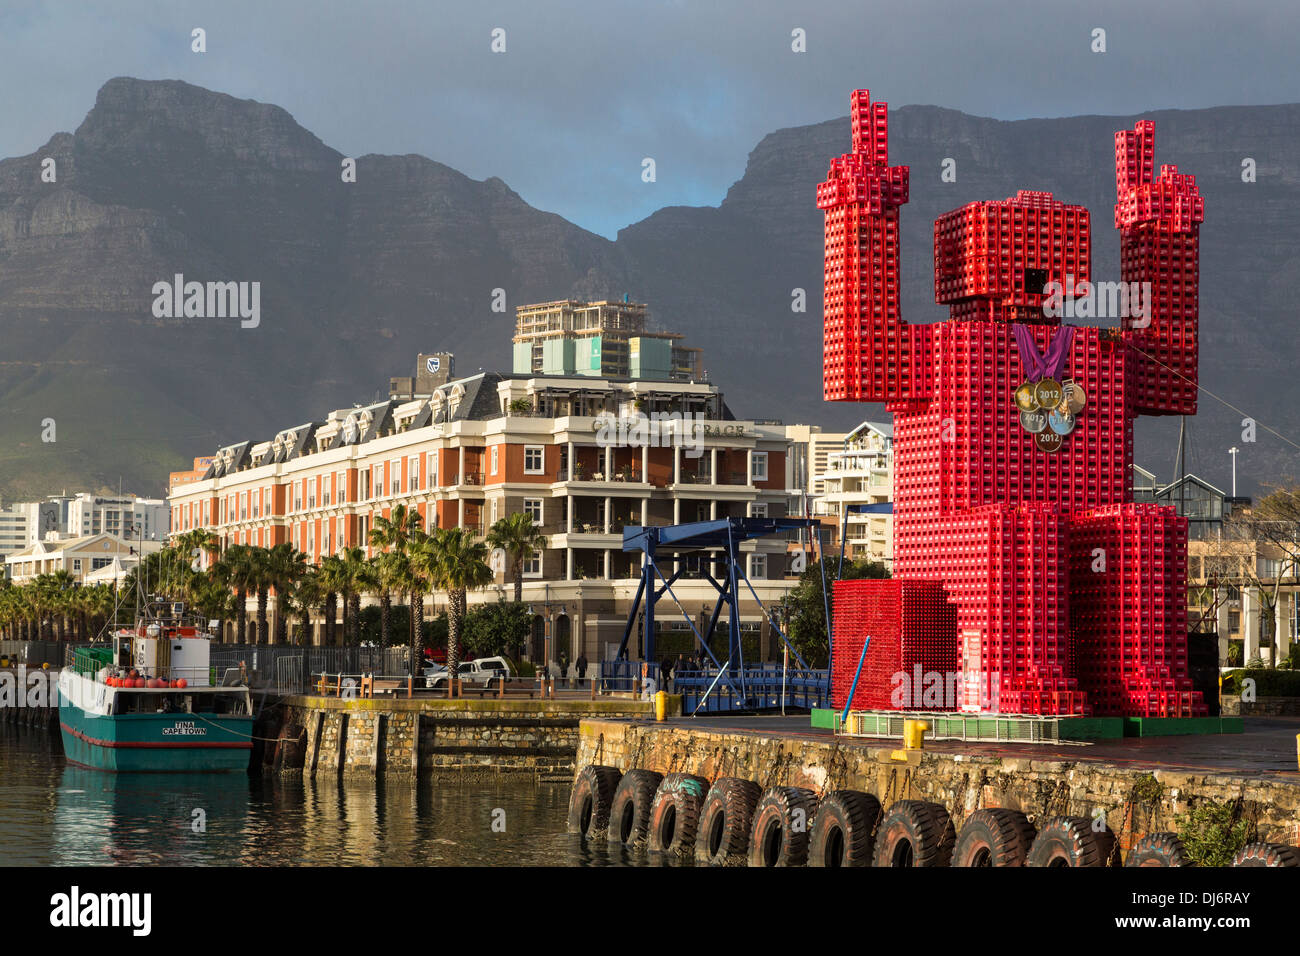 South Africa, Cape Town. 'Lego Man' sculpture made of 4200 plastic Coca Cola crates. Stock Photo